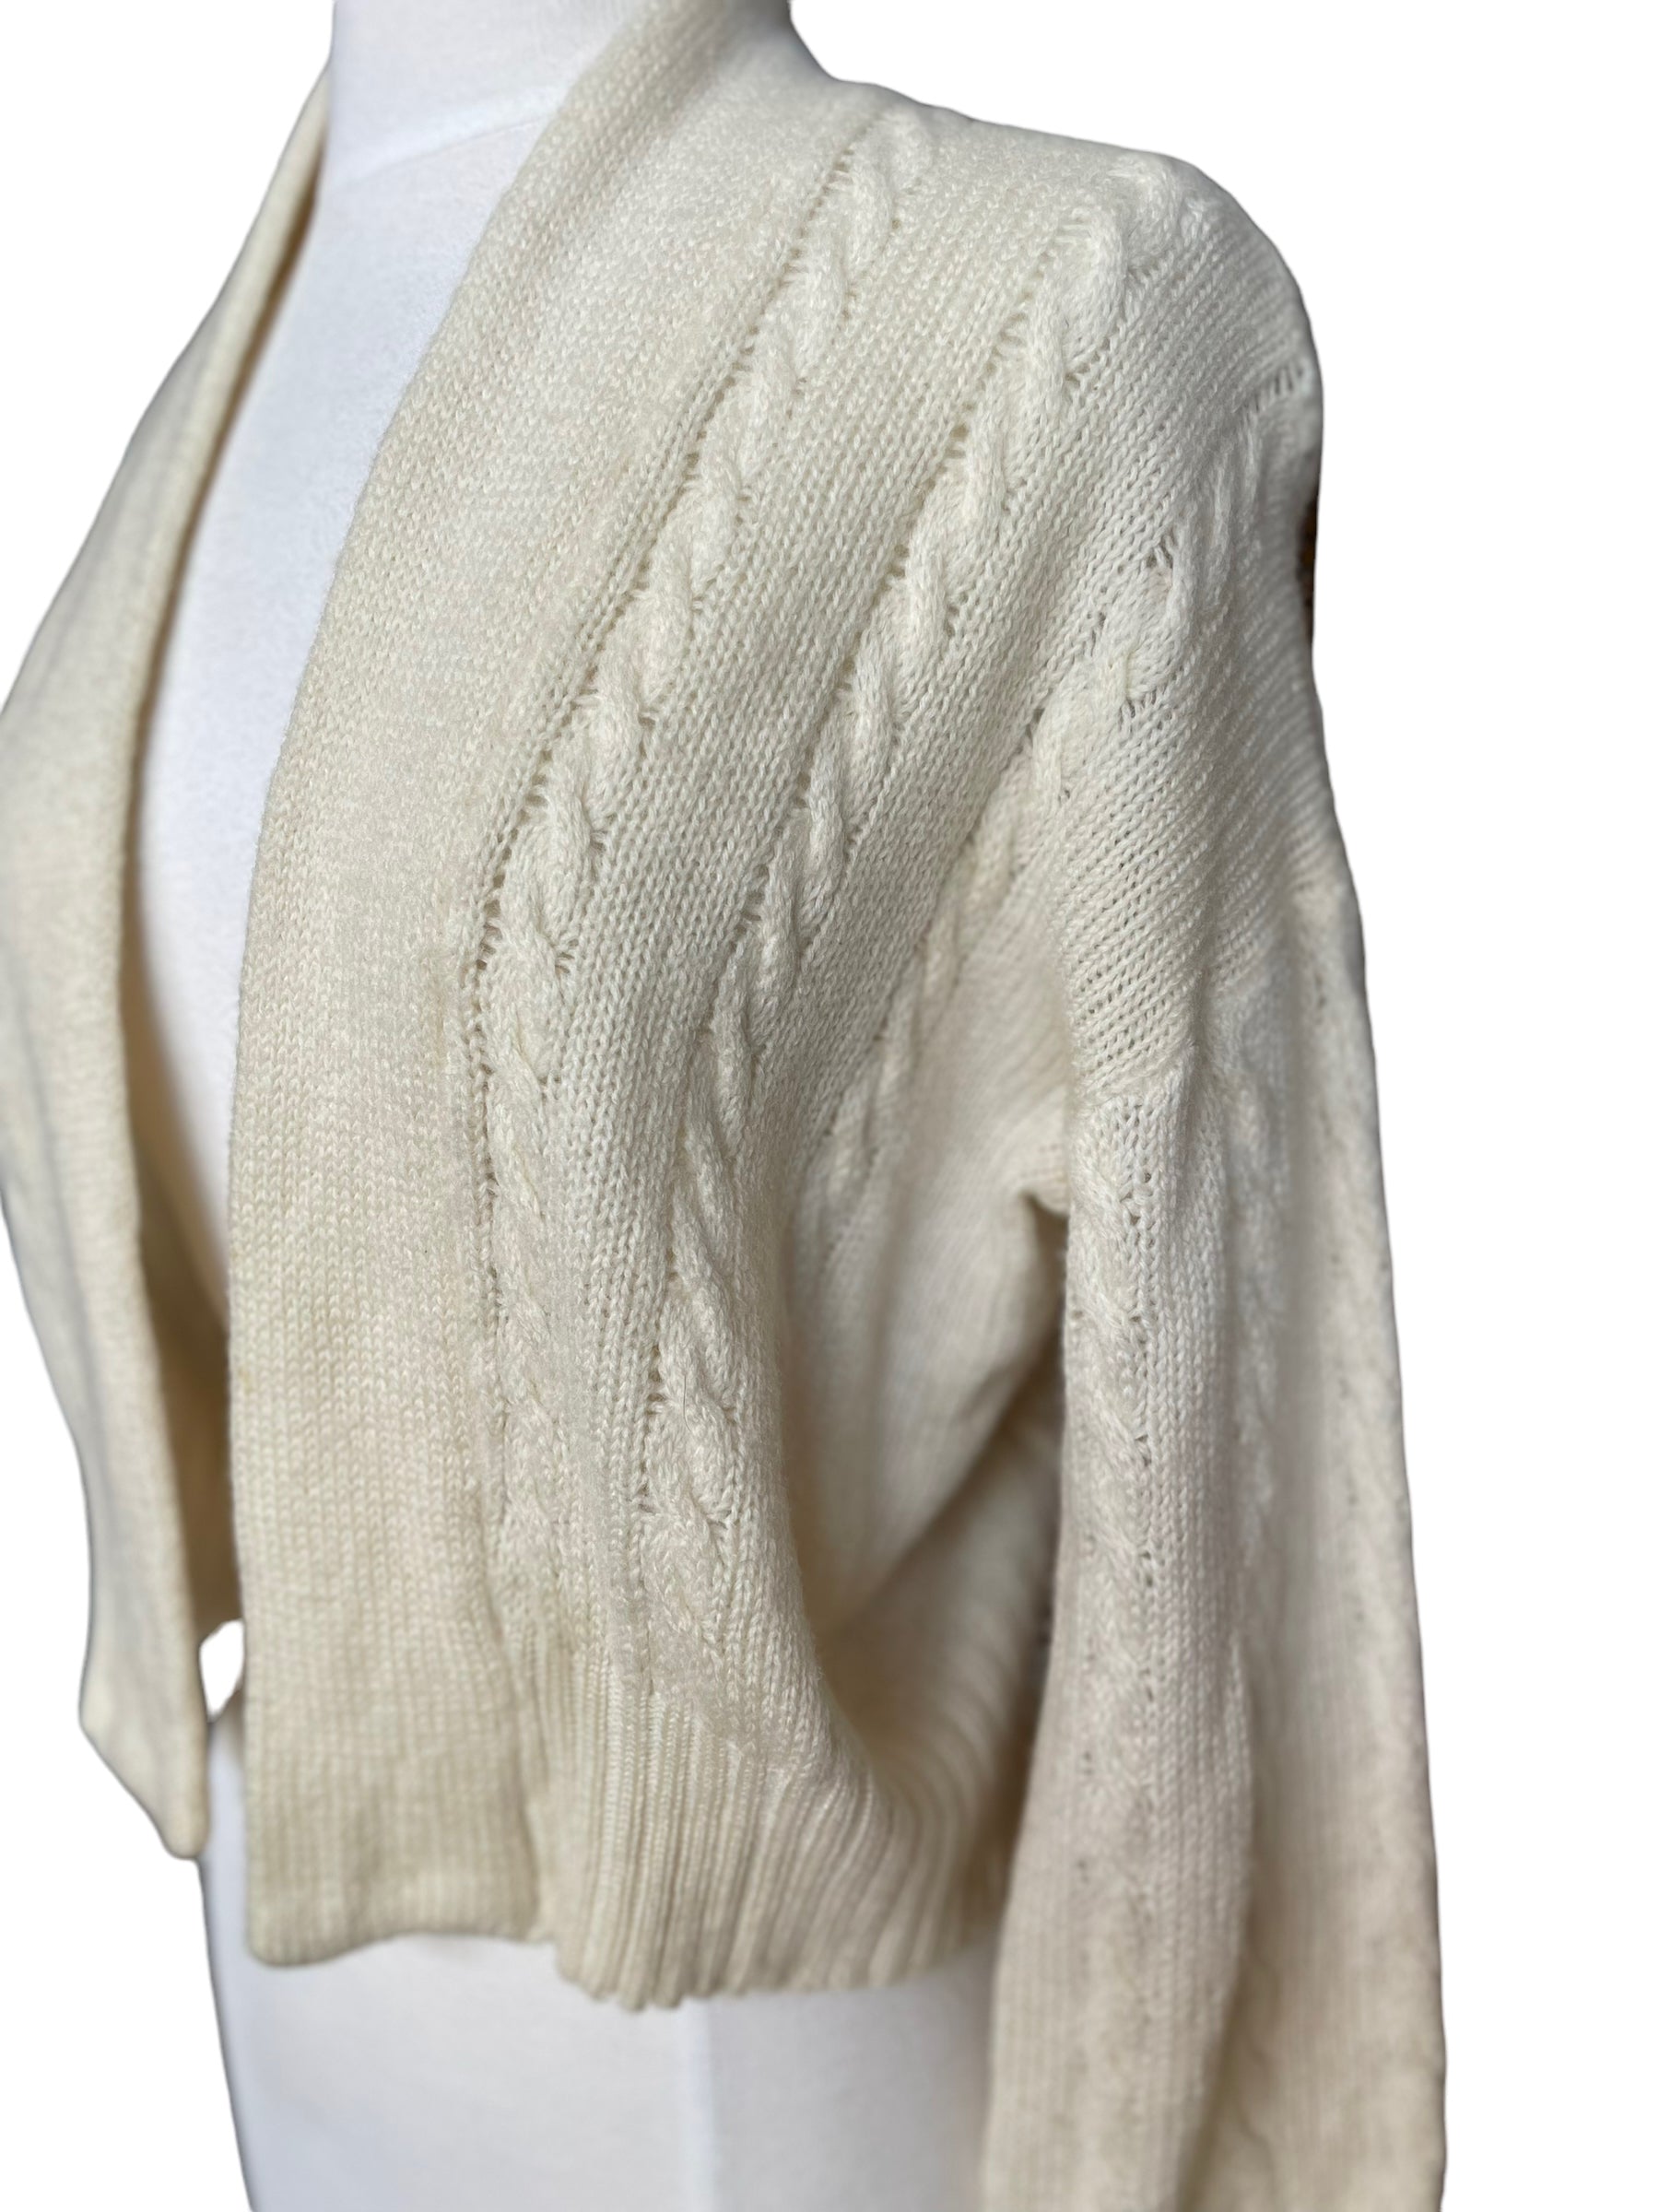 Front left side of Vintage 1950s Cable Knit Cardigan Sweater | Barn Owl Seattle | Seattle True Vintage